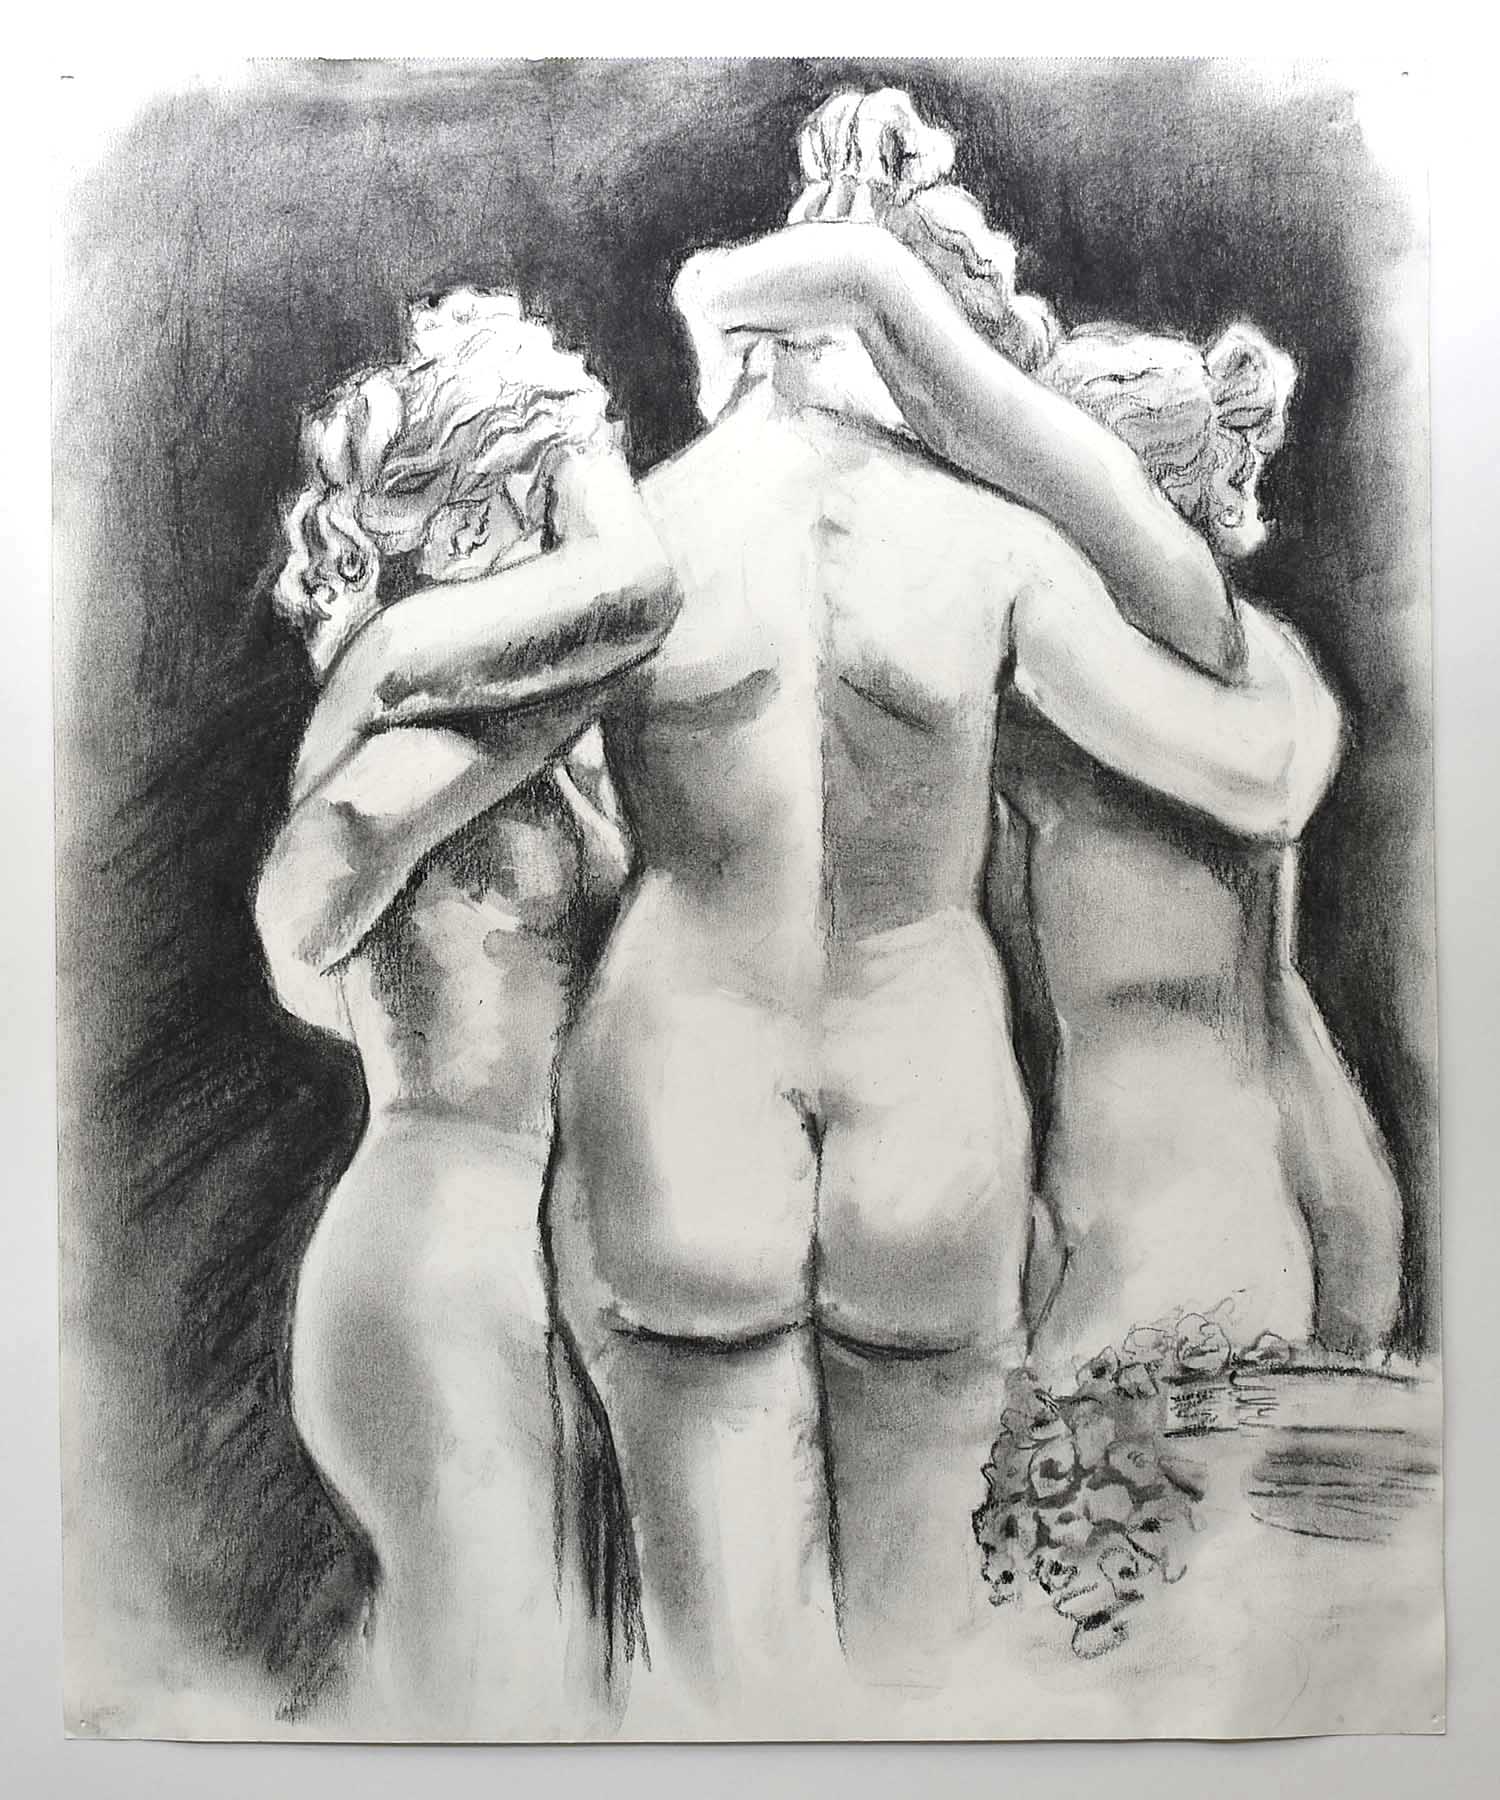 Jill Paz, The Three Graces, 2021, charcoal on paper in artist’s frame, unframed: 43 × 35 cm (17 × 13.8 inches), framed: 54.2 × 46 cm (21.3 × 18.1 inches).